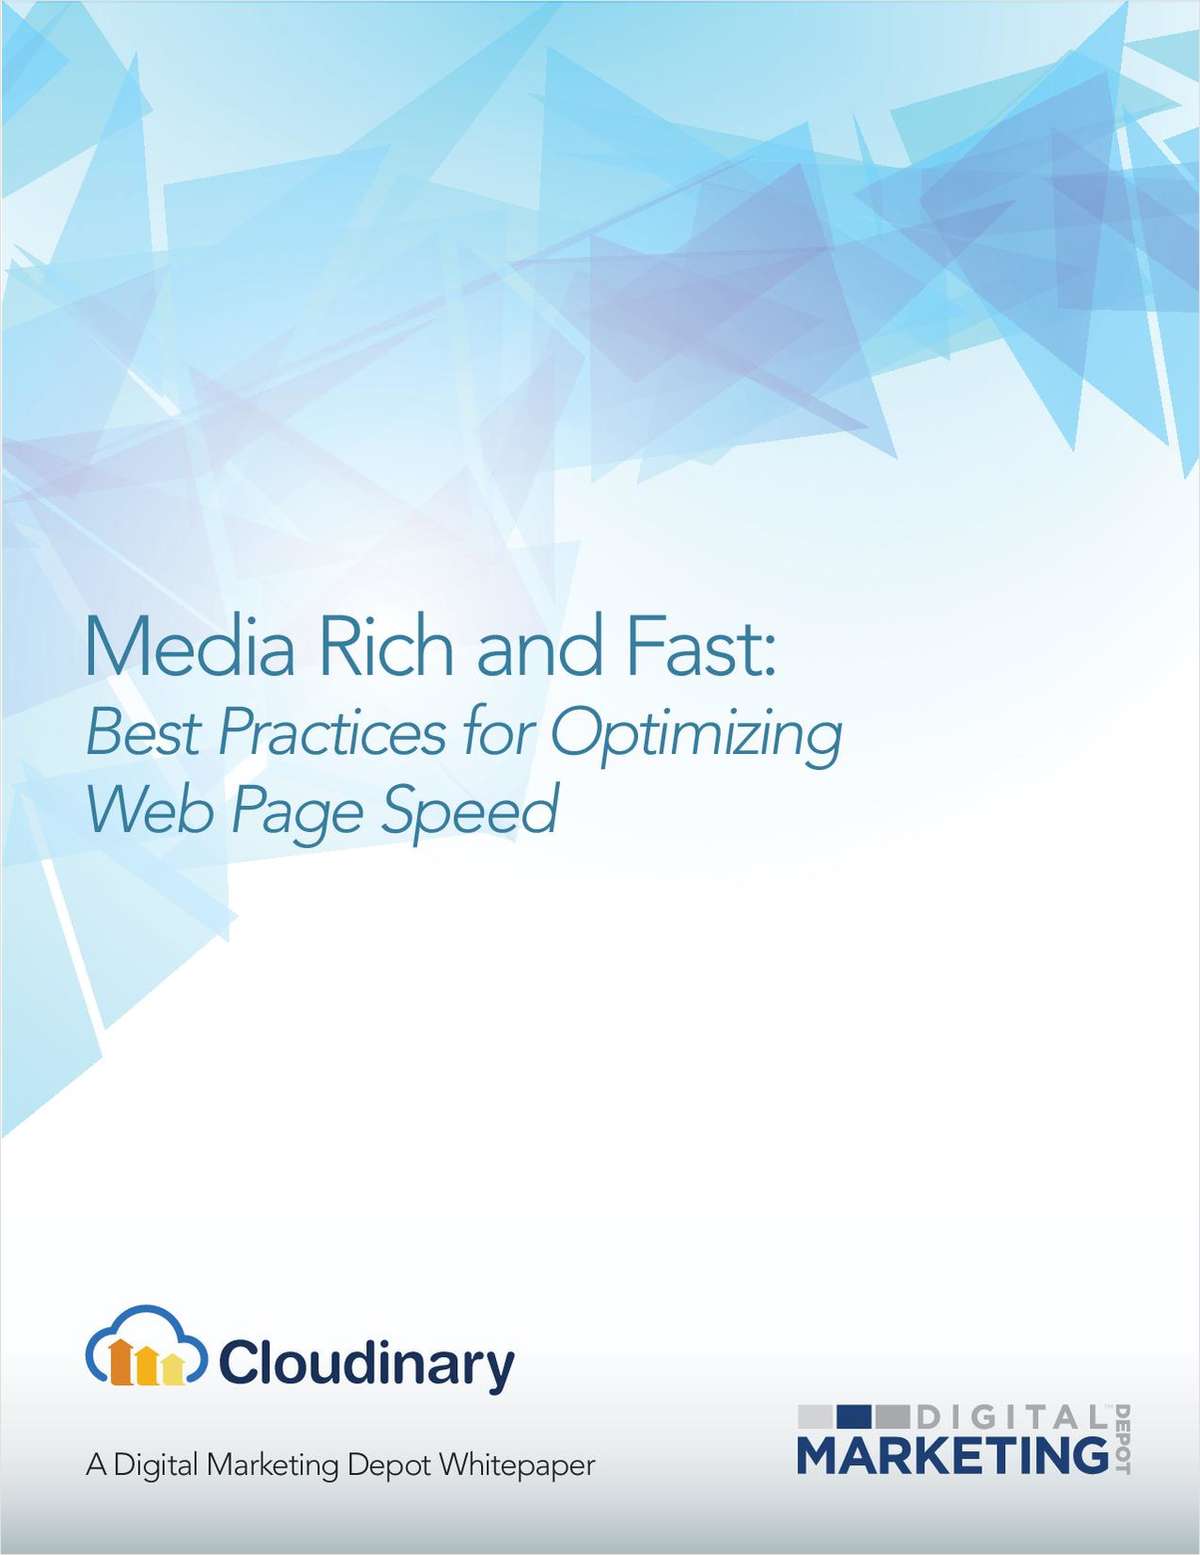 Media Rich and Fast: Best Practices for Optimizing Web Page Speed